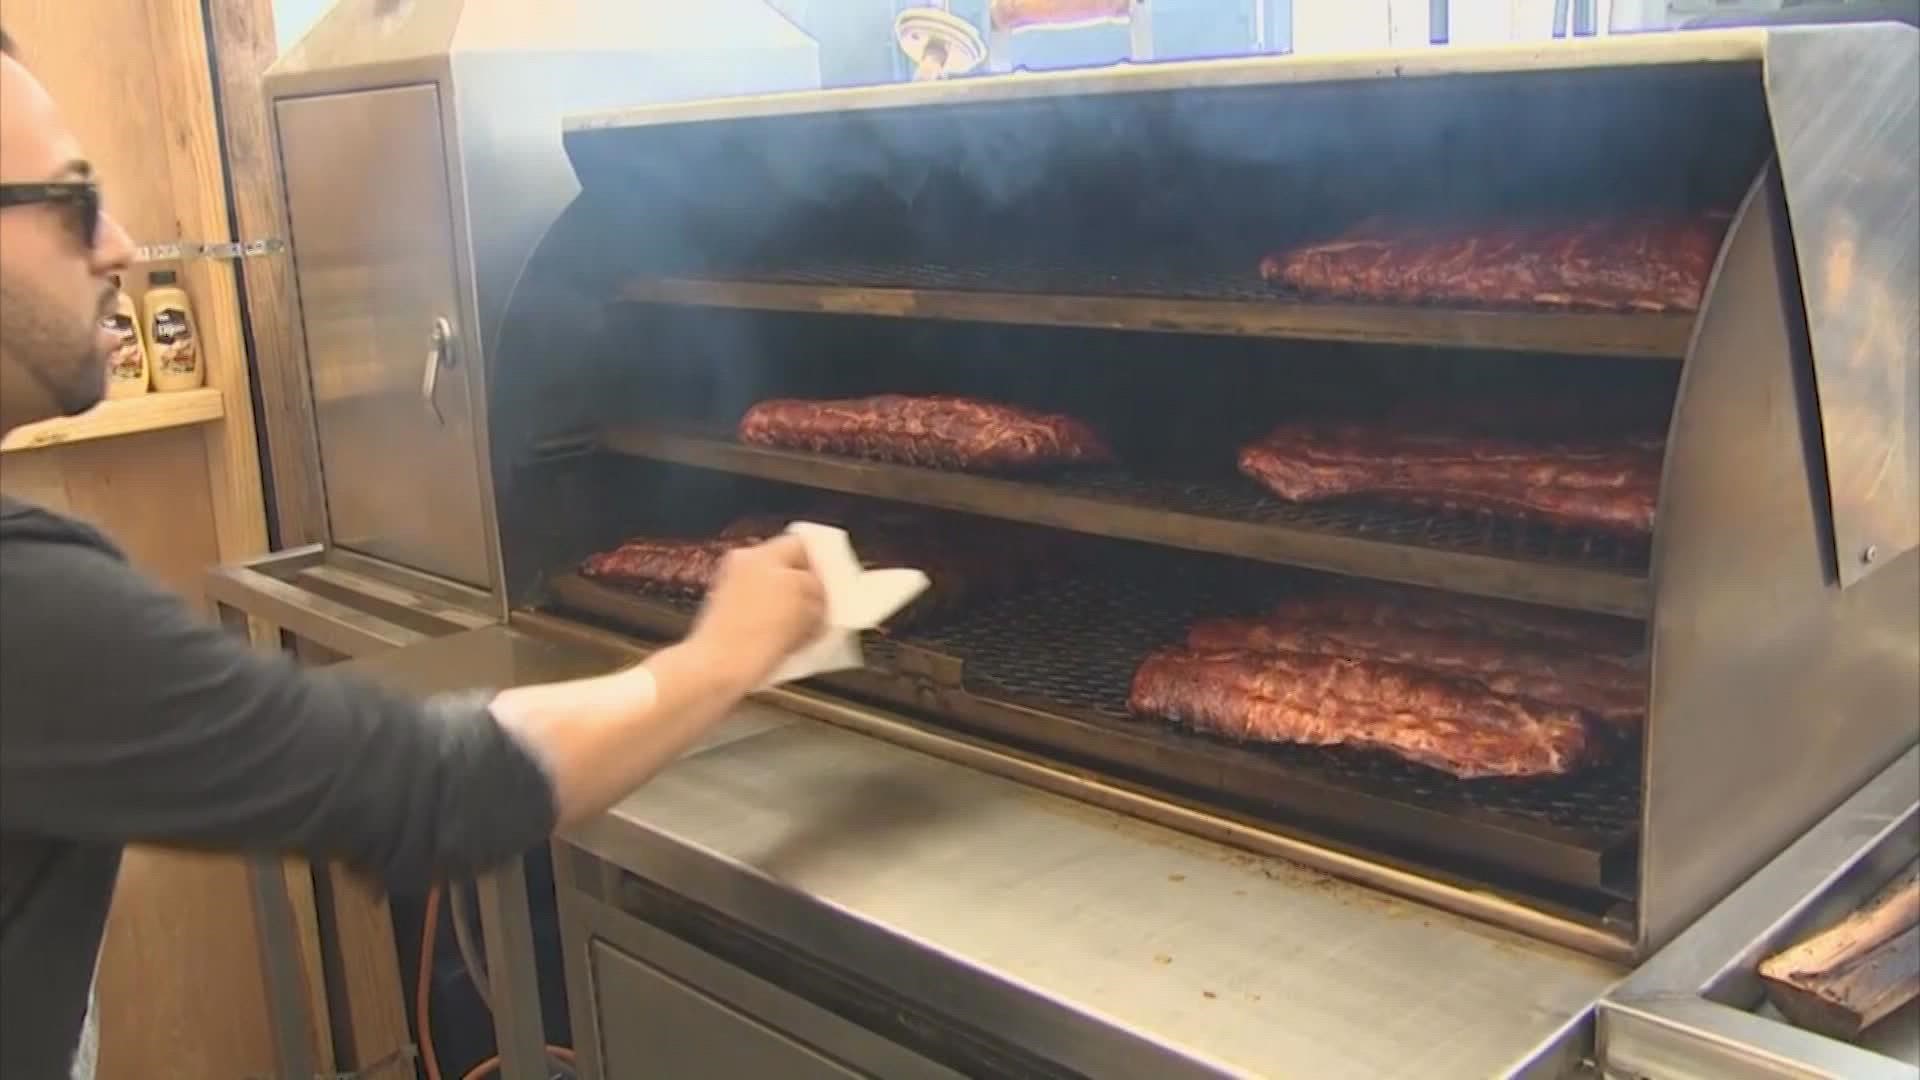 The upcoming Houston Livestock Show and Rodeo will feature a new category for the World’s Championship Bar-B-Que Contest called "Open Contest."